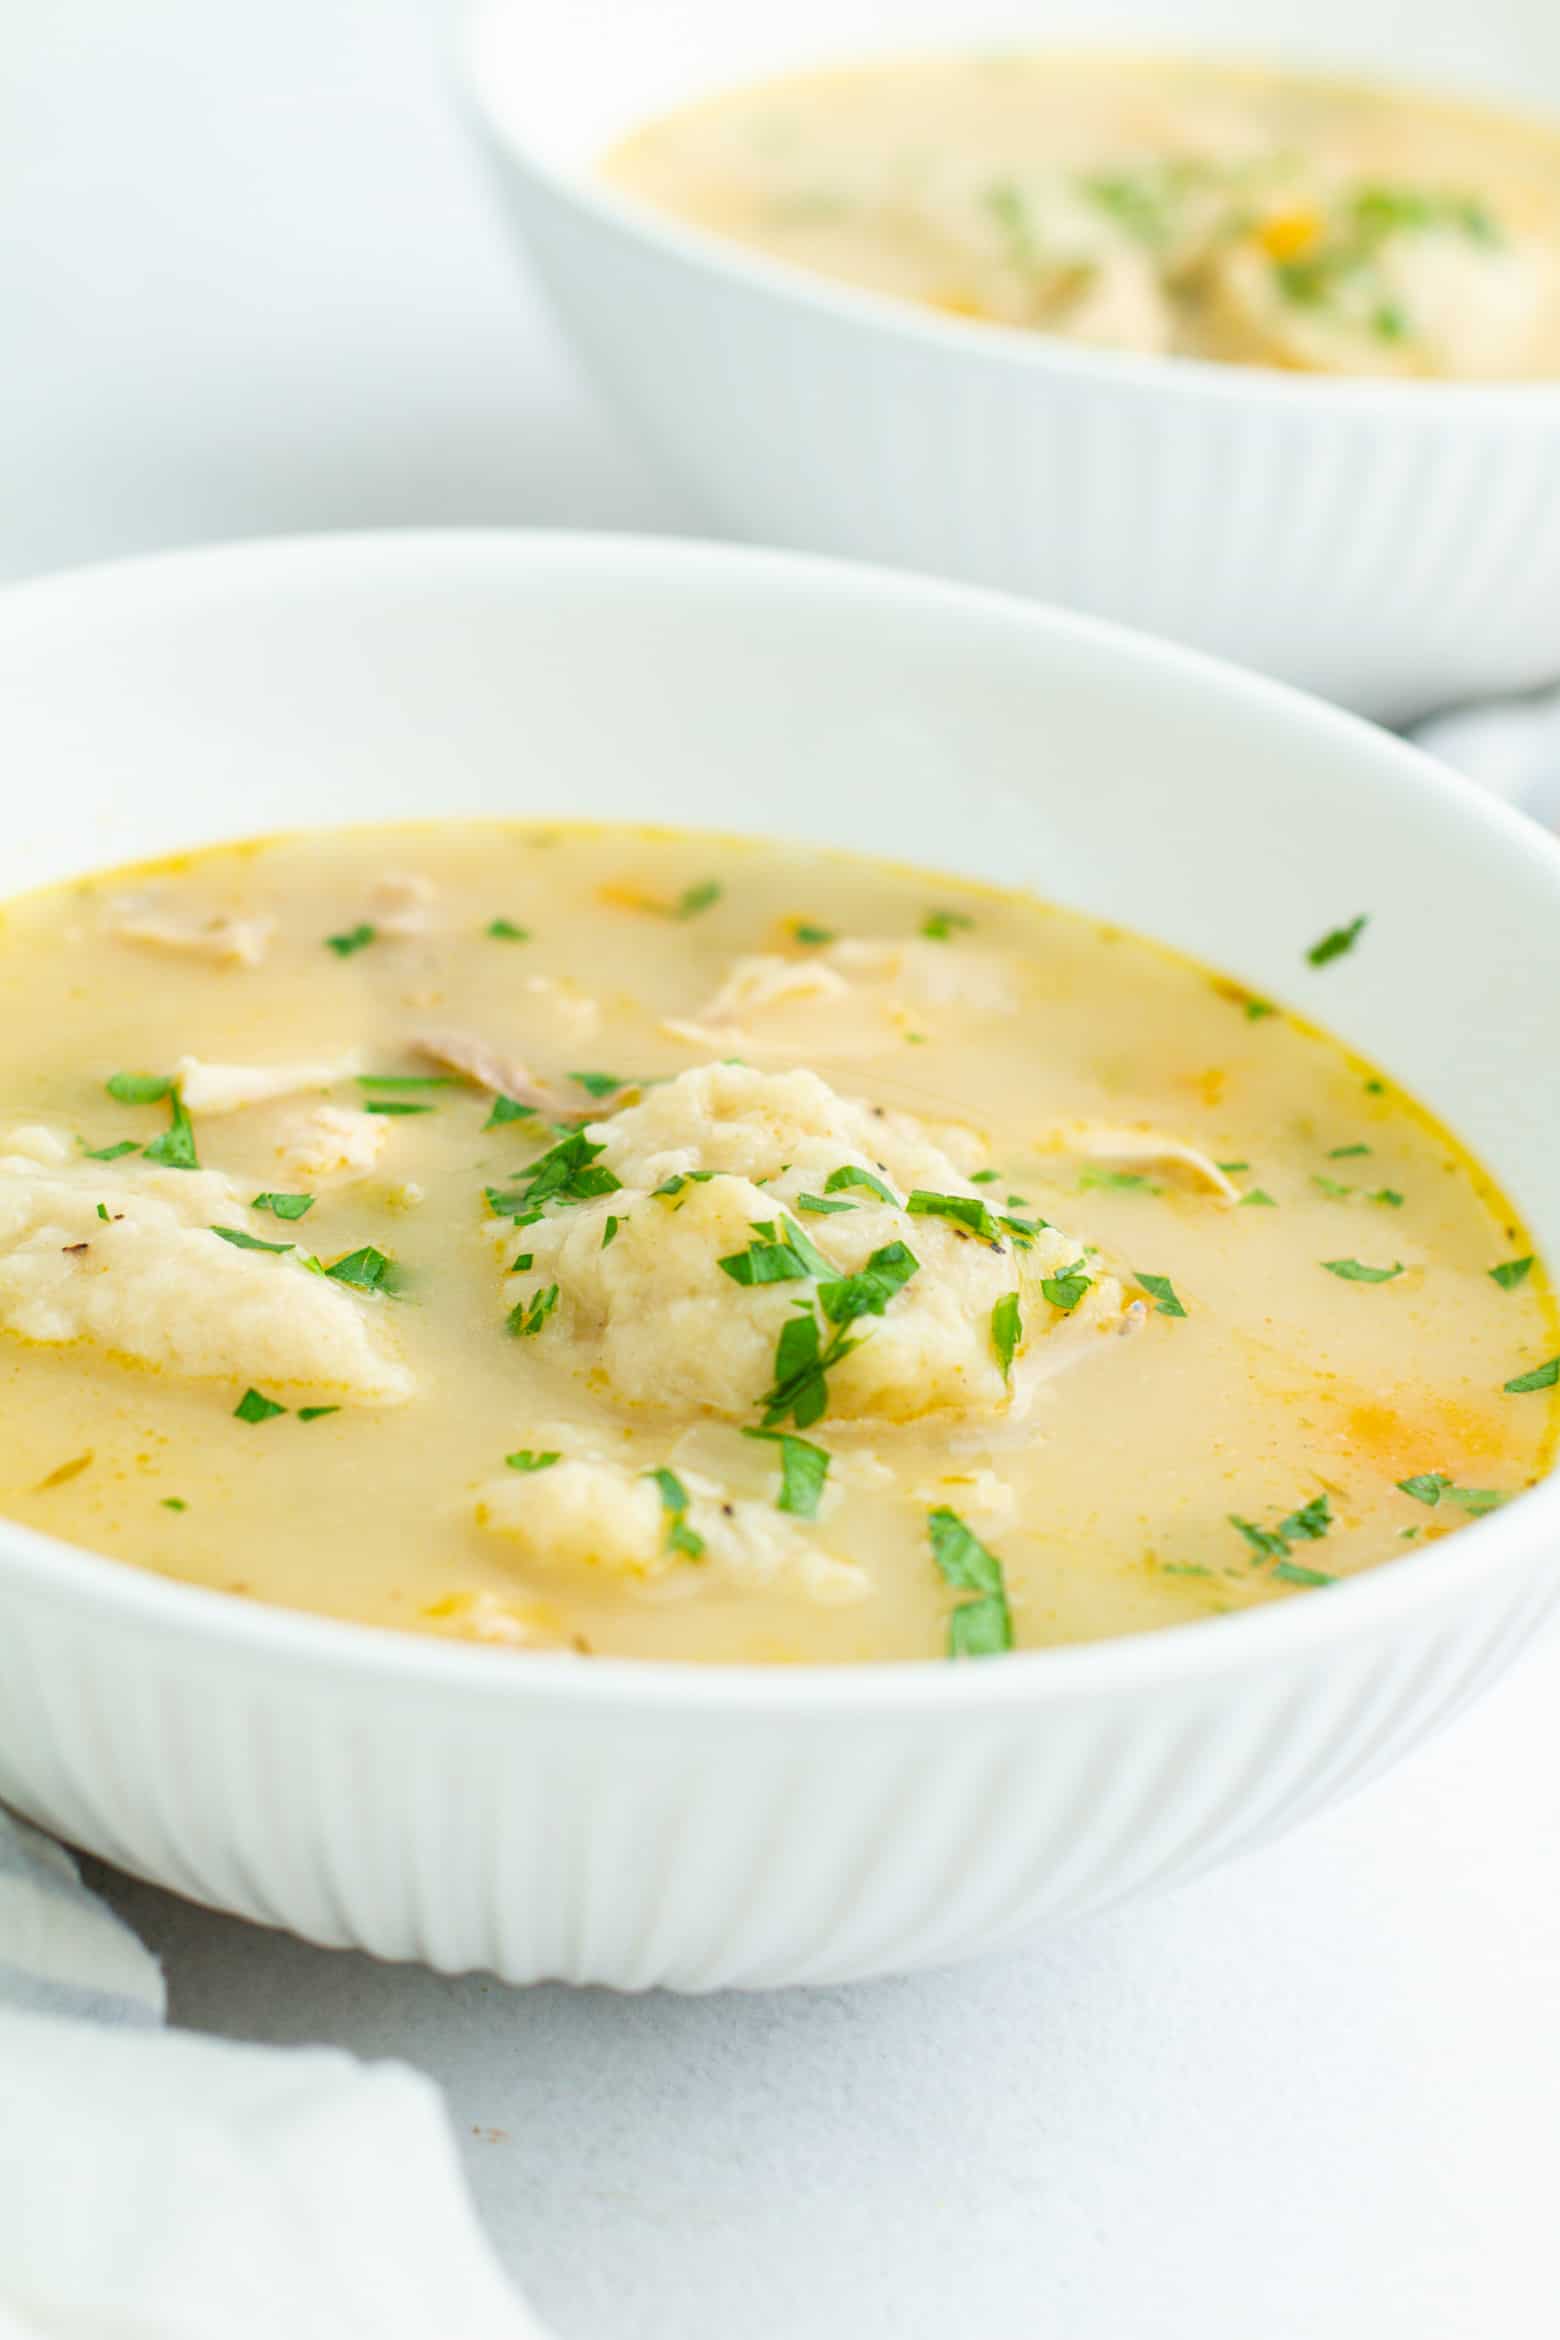 Chicken and dumplings in a bowl.